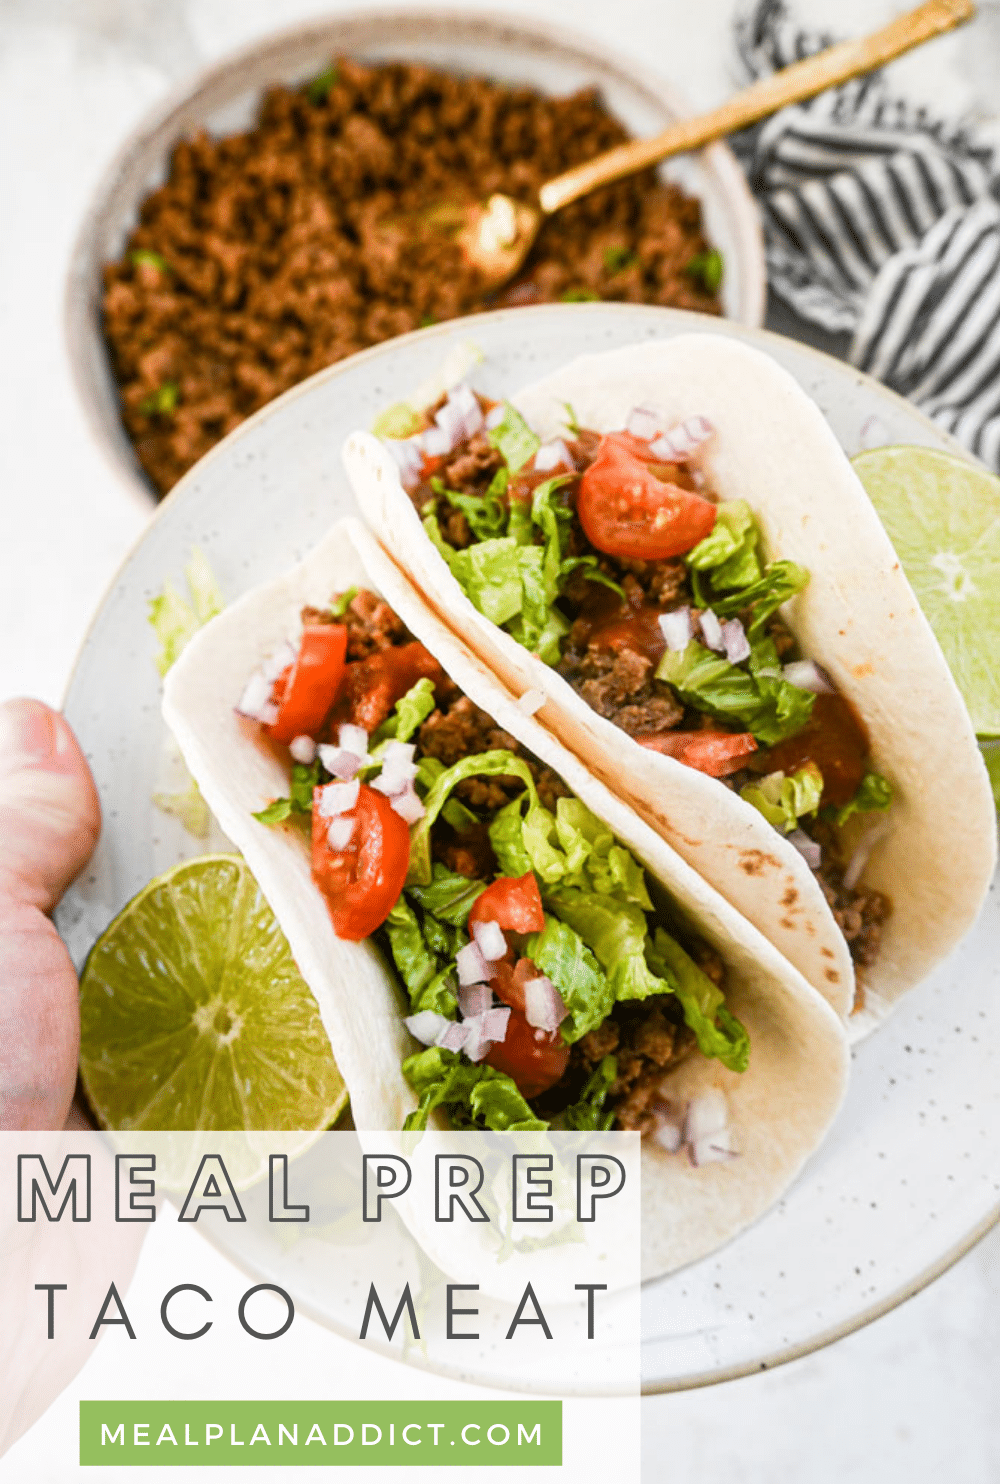 Meal Prep This Ground Beef Taco Meat